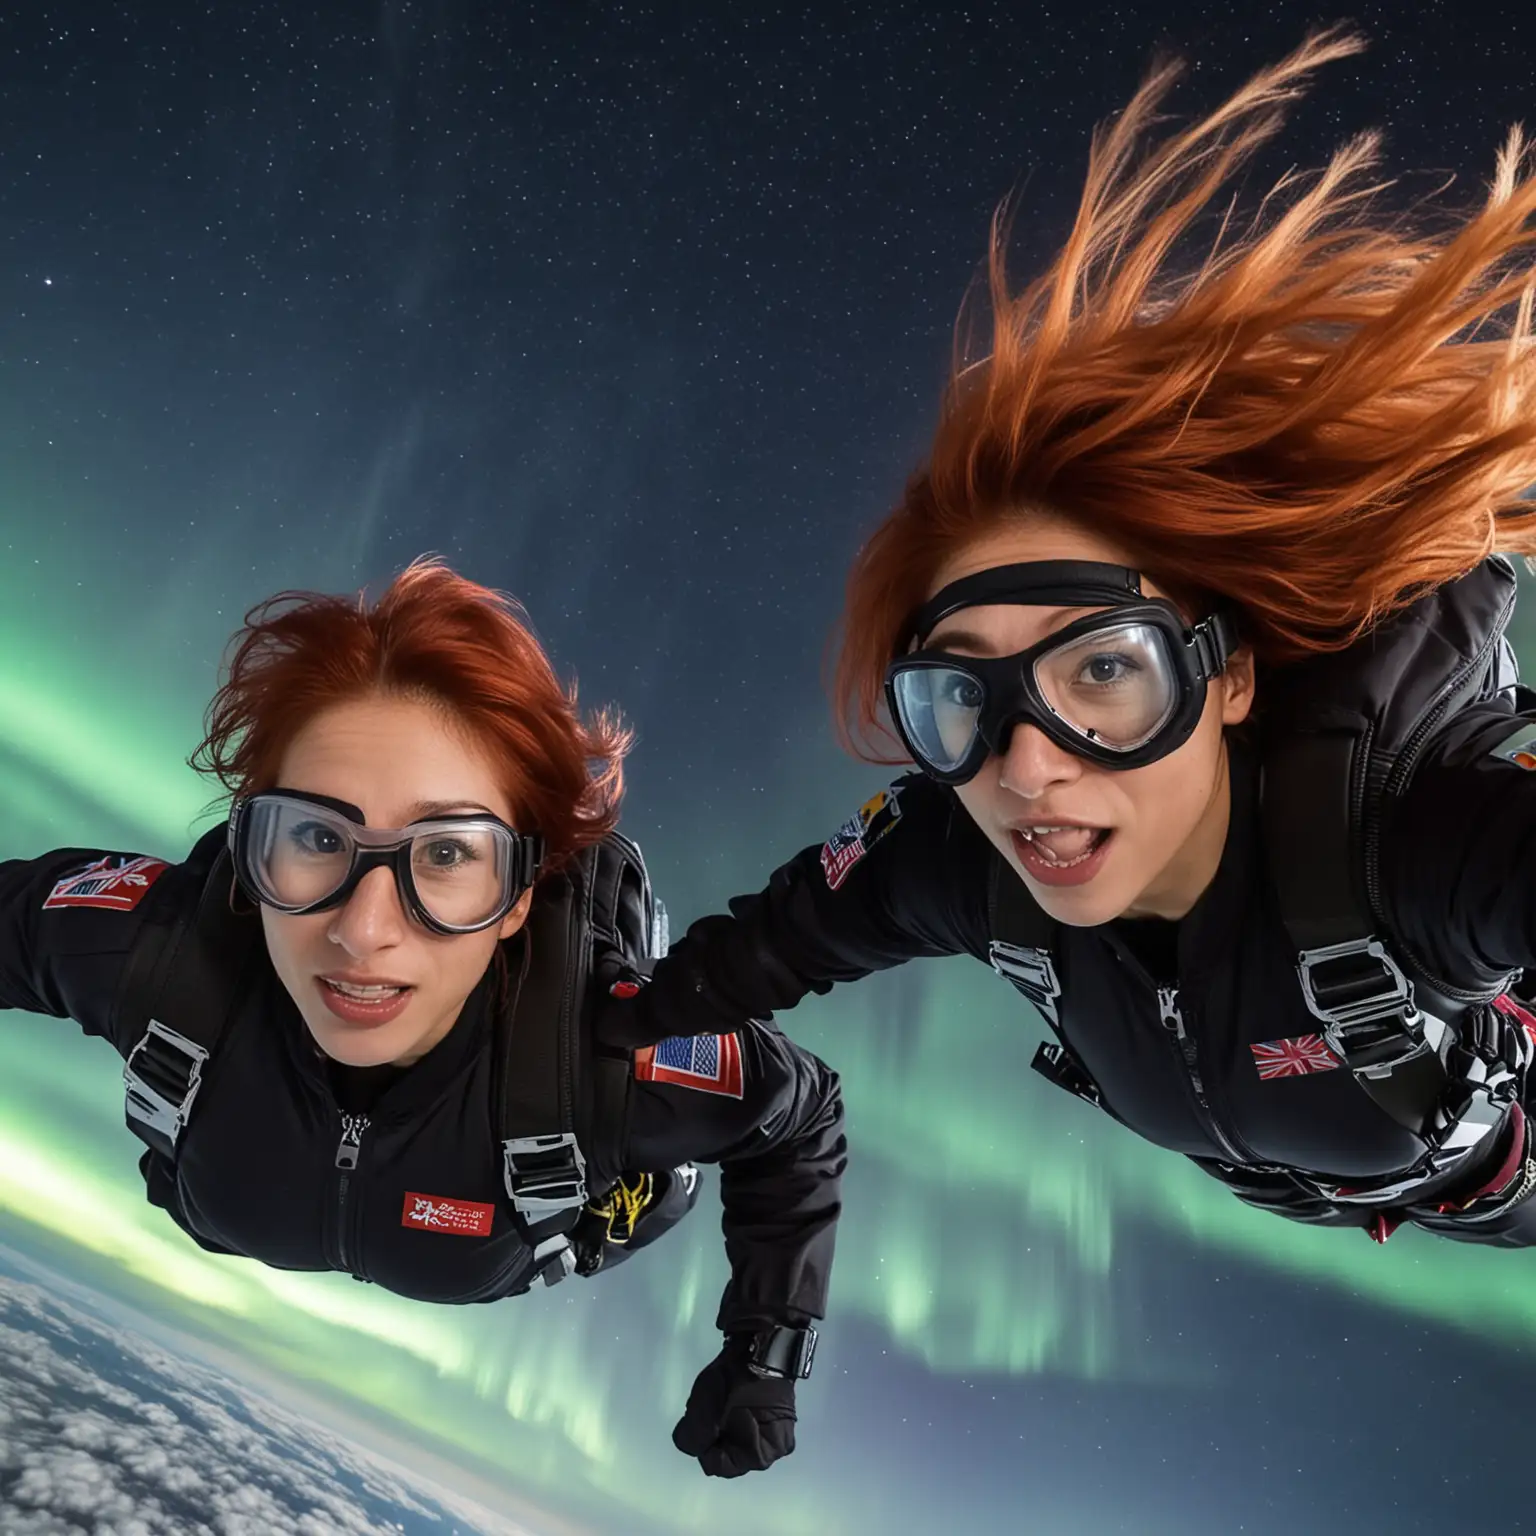 two women, one a red haired Japanese and the other a dark haired English woman, skydiving separately.  The camera is beneath and in front of them, looking up with the Northern Lights in the sky. They are wearing goggles.